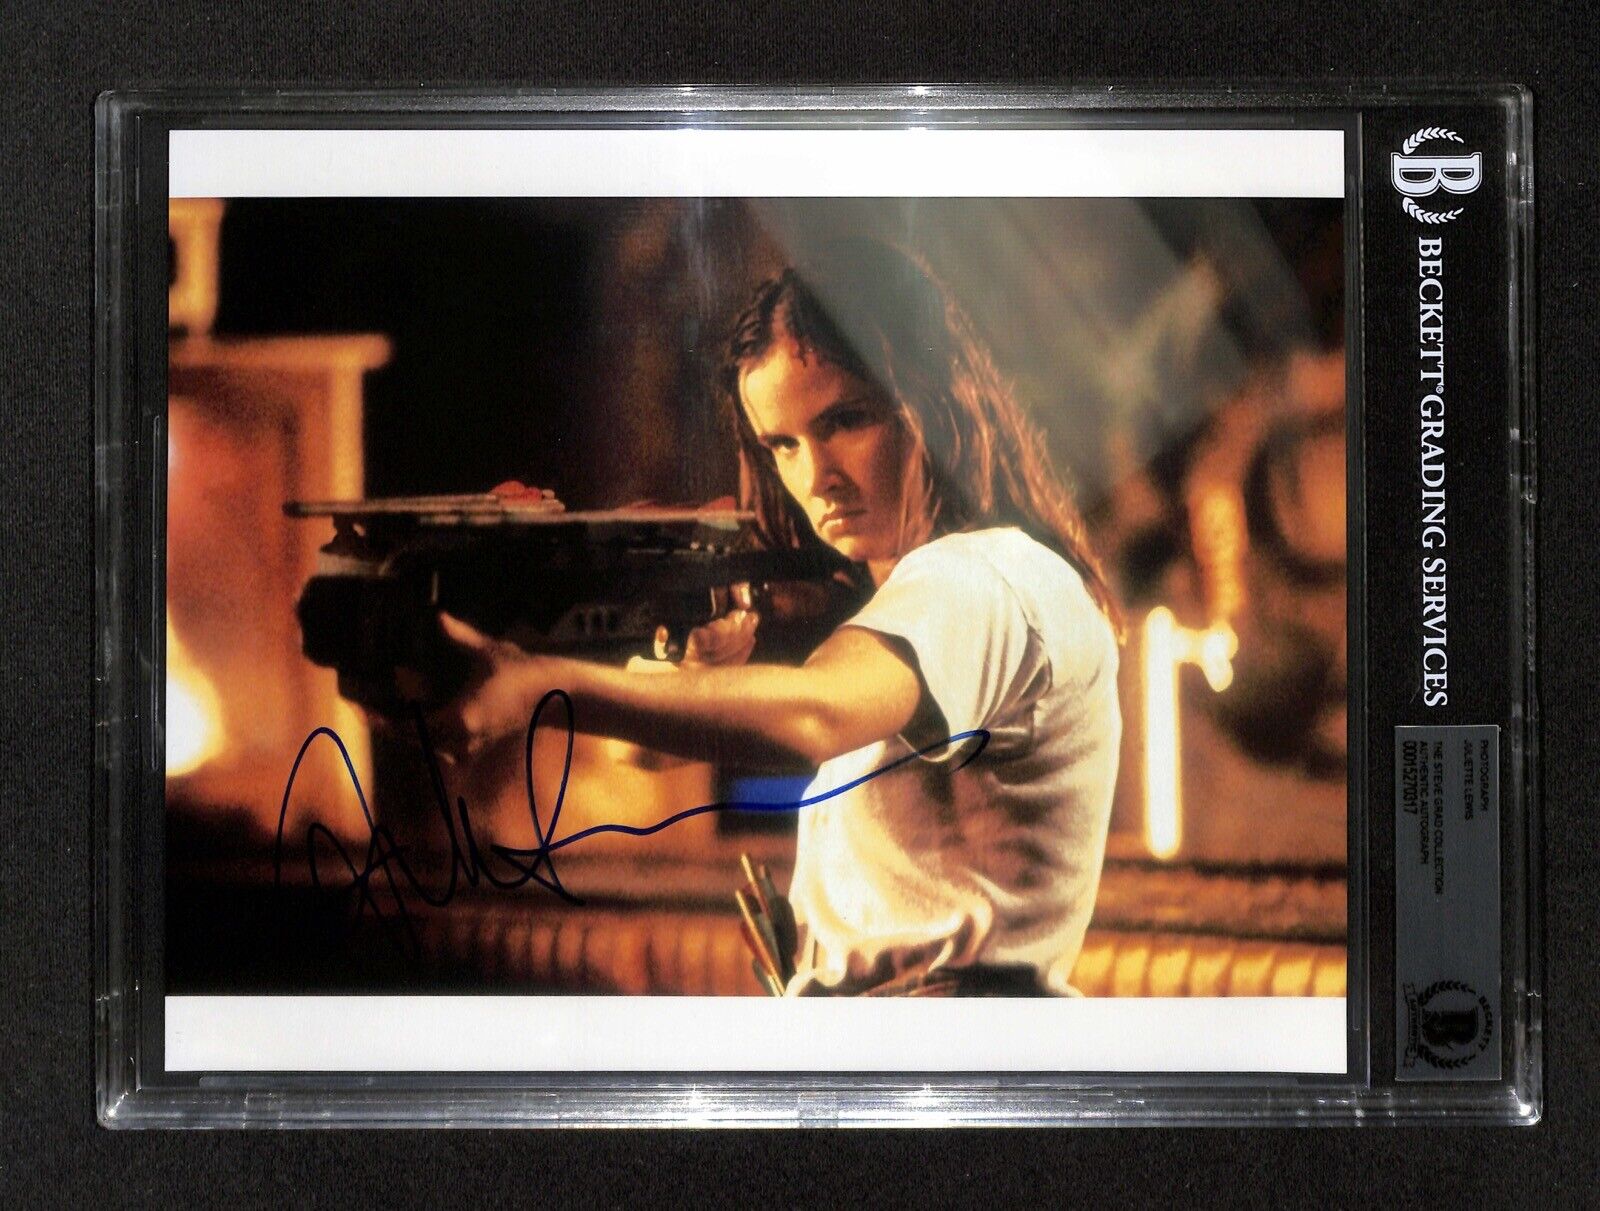 Juliette Lewis From Dusk Till Dawn Signed 8x10 Photo BAS (Grad Collection)